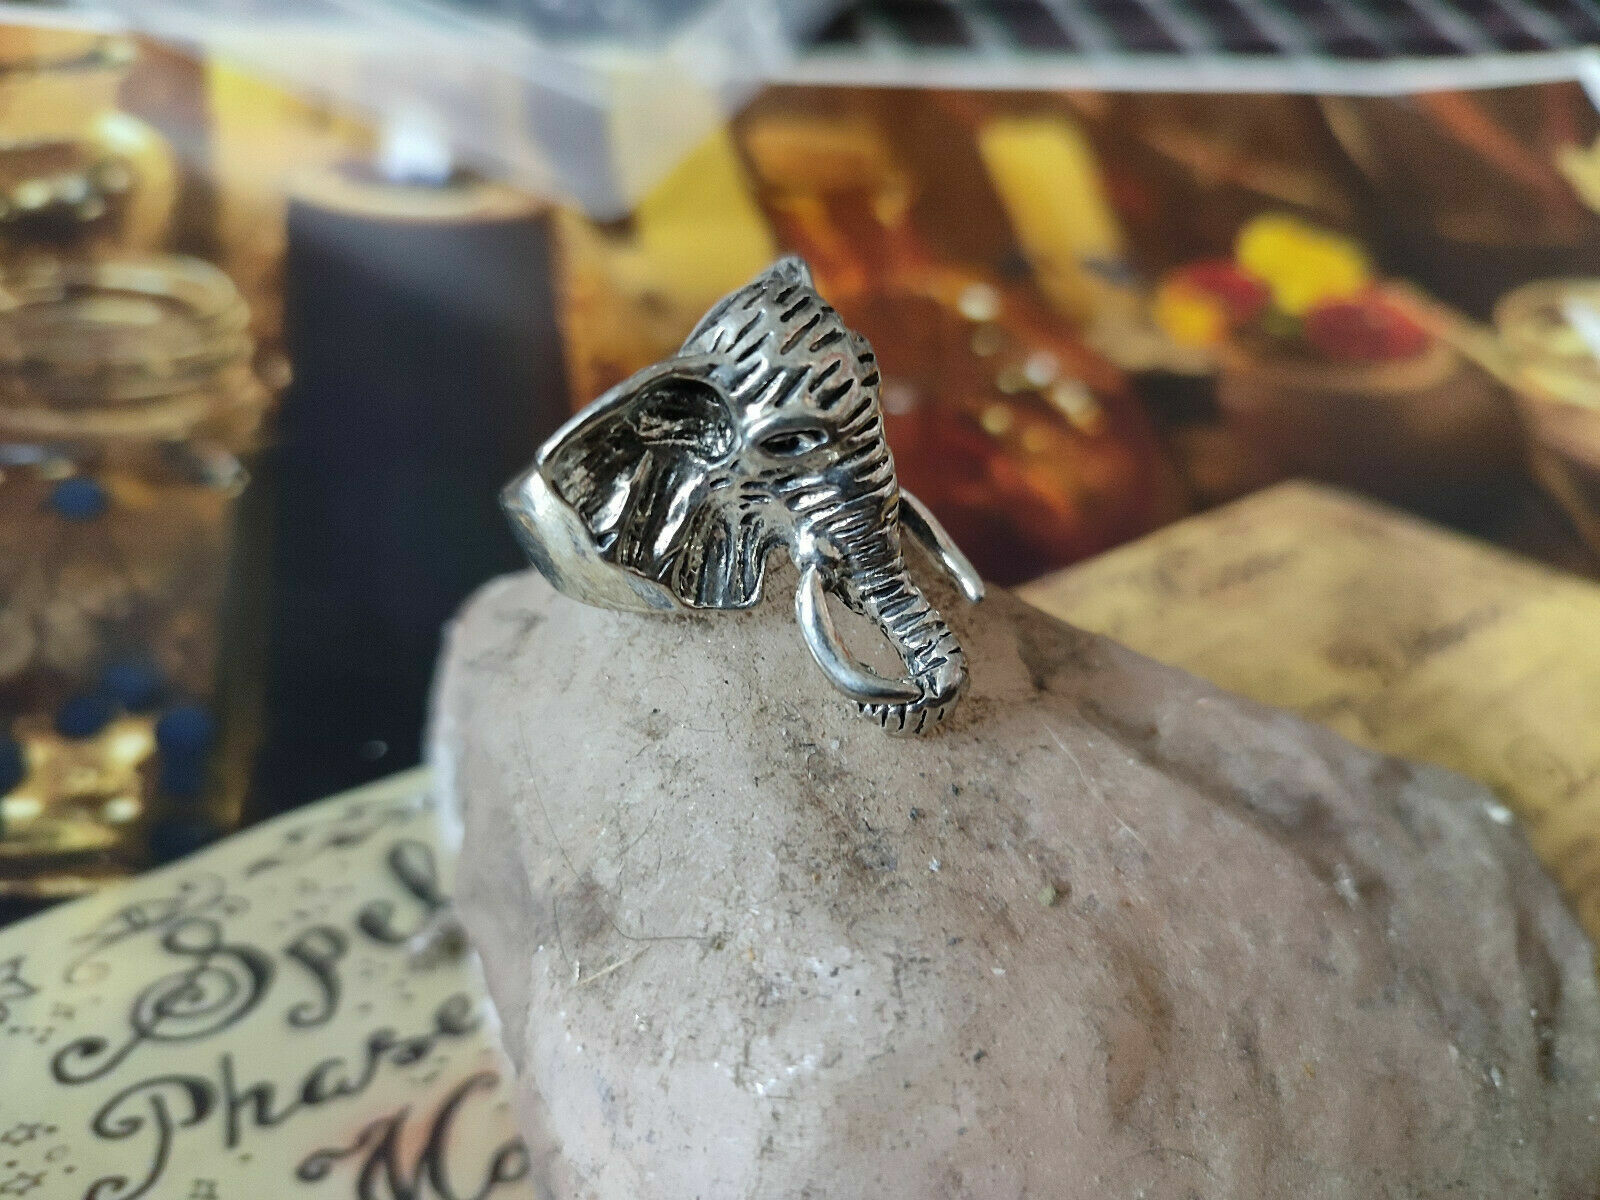 RARE MIDDLE EASTERN 999 UNLIMITED WISH RING -A++ ULTIMATE MOST POWER AGHORI